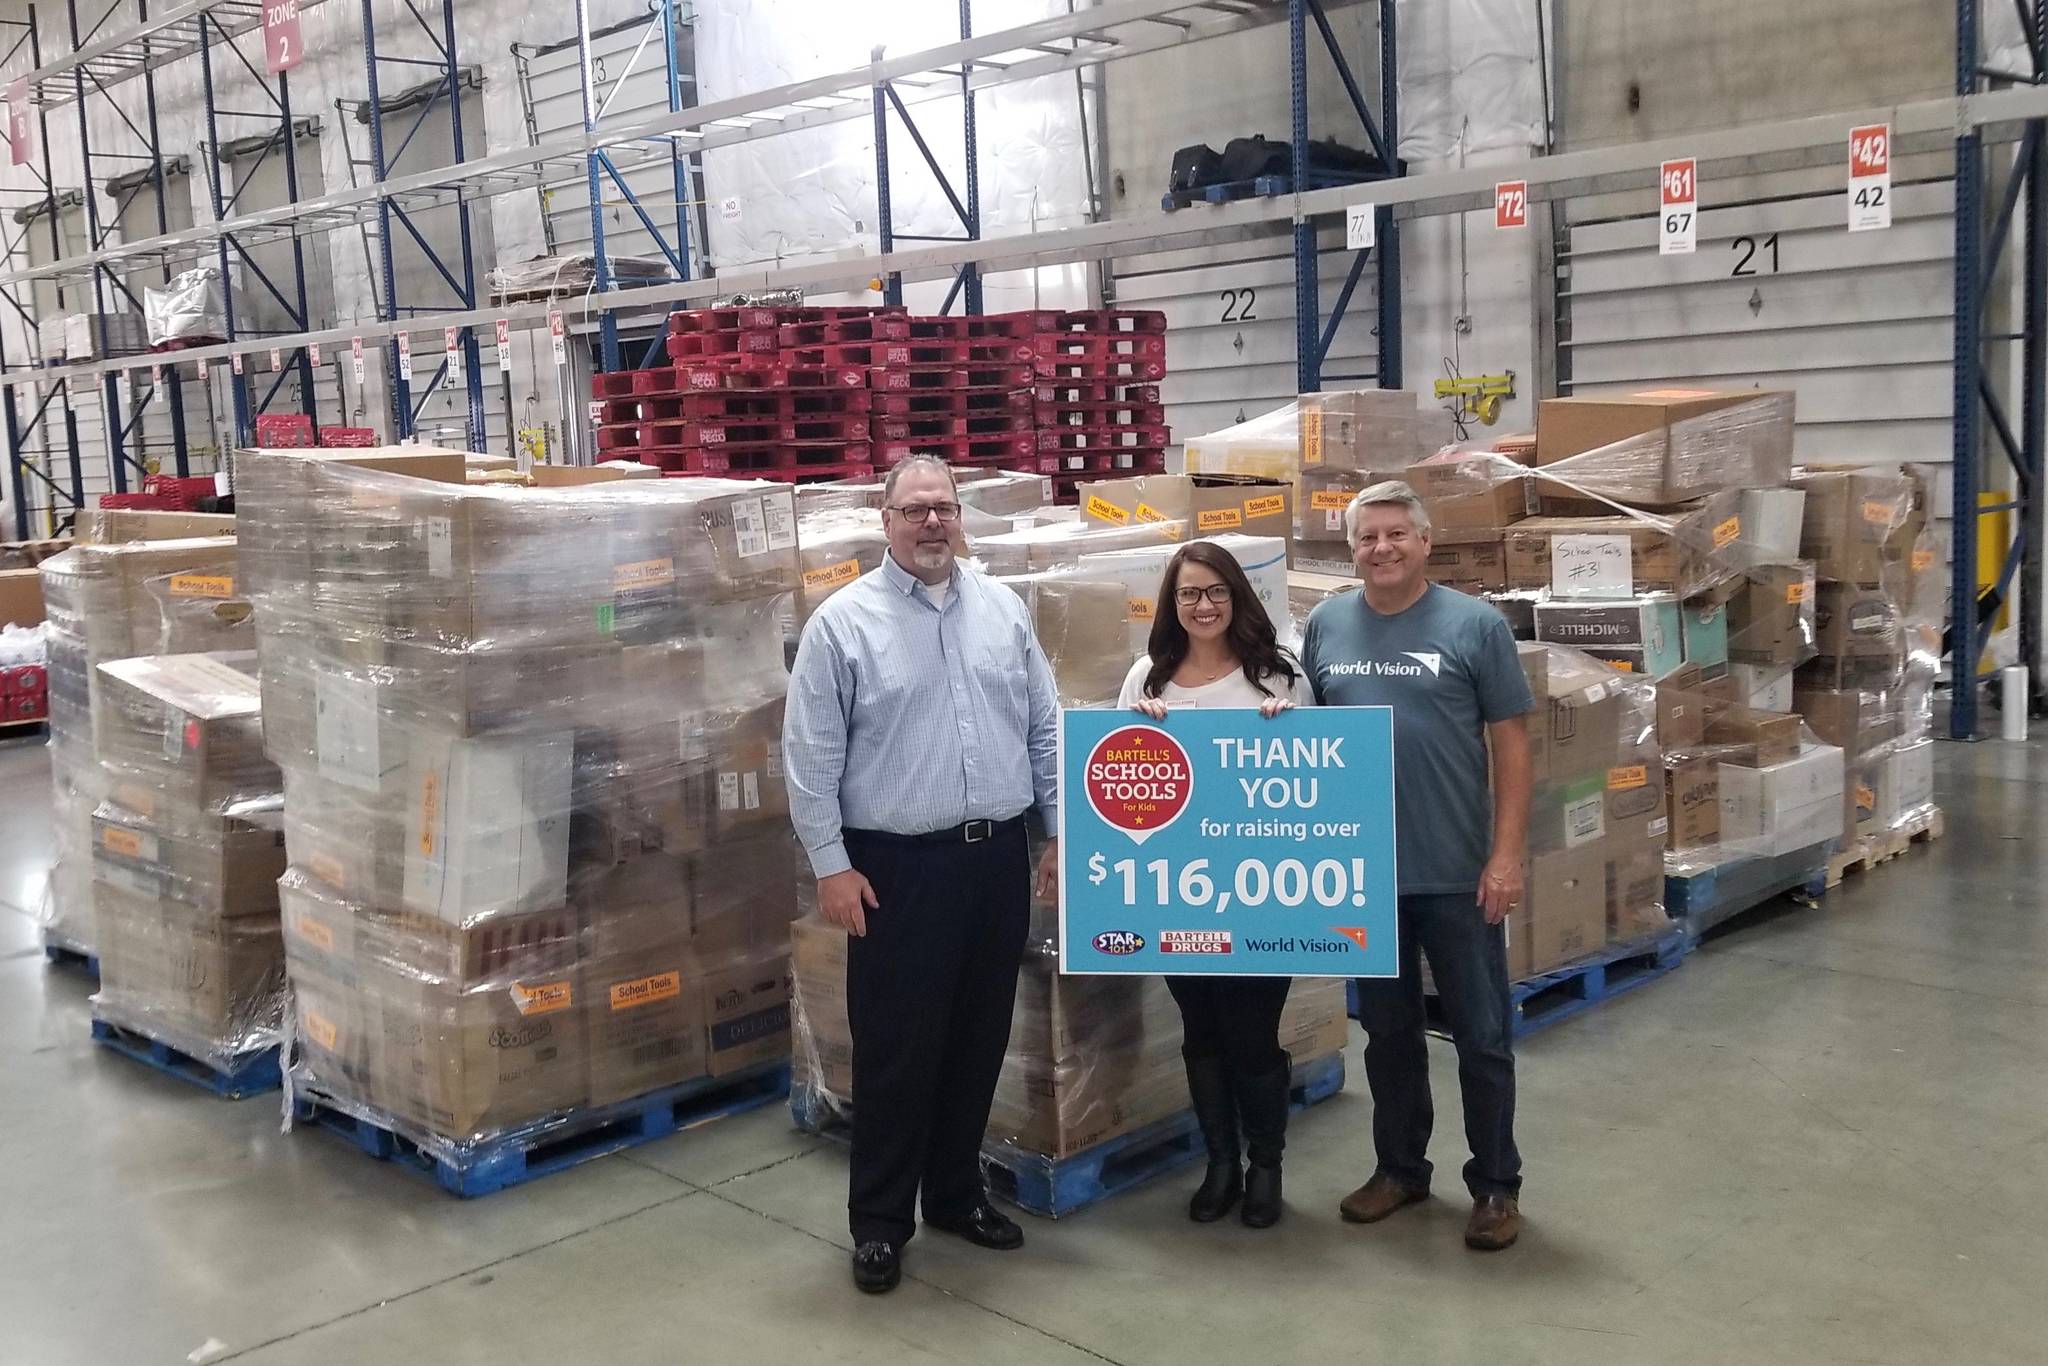 From left, Ken Mahoney, SVP of Operations at Bartell Drugs; Hannah Kubiak, communications manager at Bartell Drugs; and Michael Gillespie, senior director of Corporate Engagement at World Vision. COURTESY PHOTO